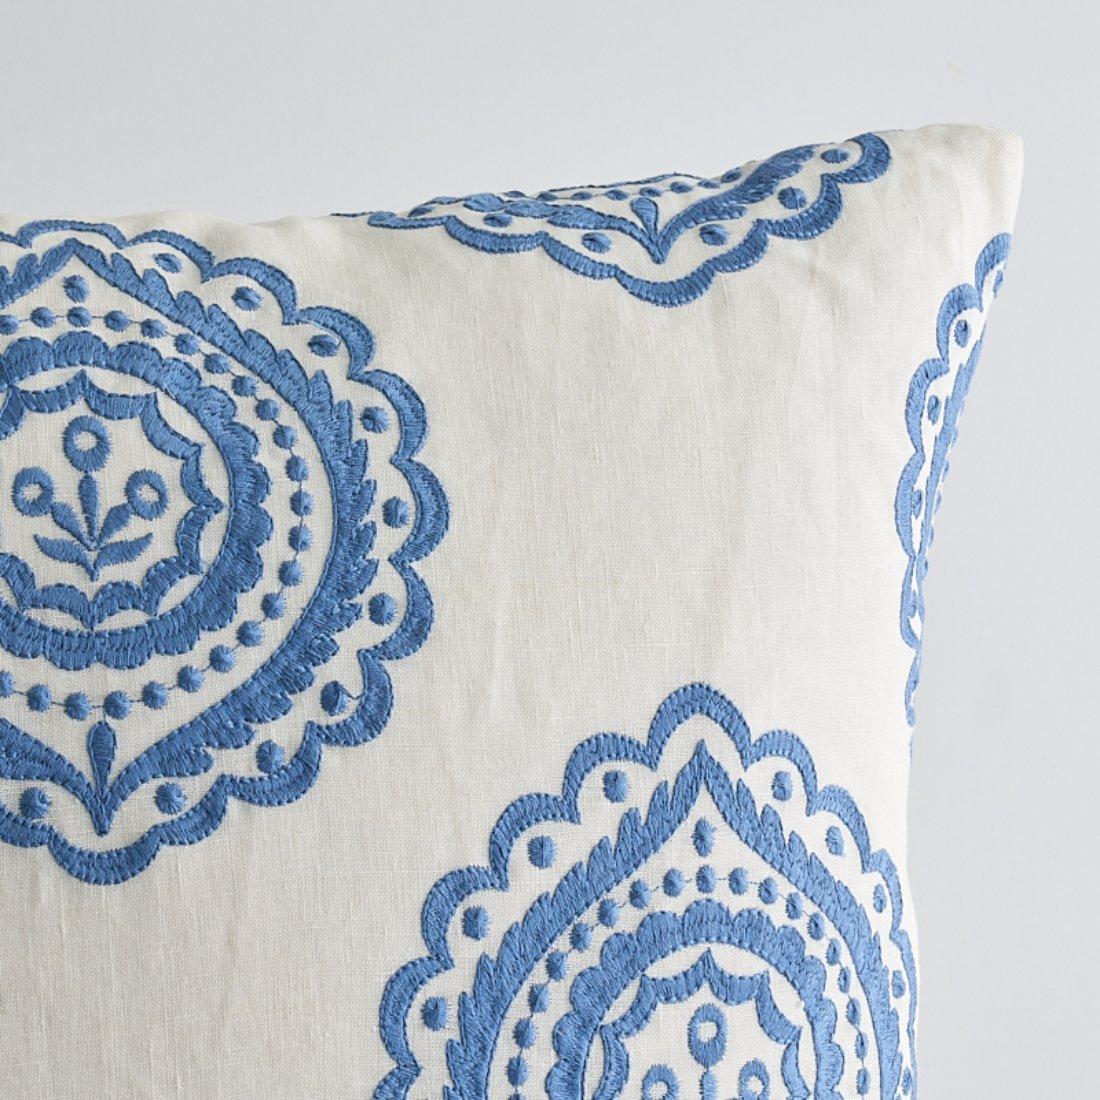 This pillow features Olana Embroidery with a knife edge finish. An enchanting medallion pattern that feels both romantic and exotic, in a gorgeous range of spot-on, supremely livable hues. Pillow includes a feather/down fill insert and hidden zipper